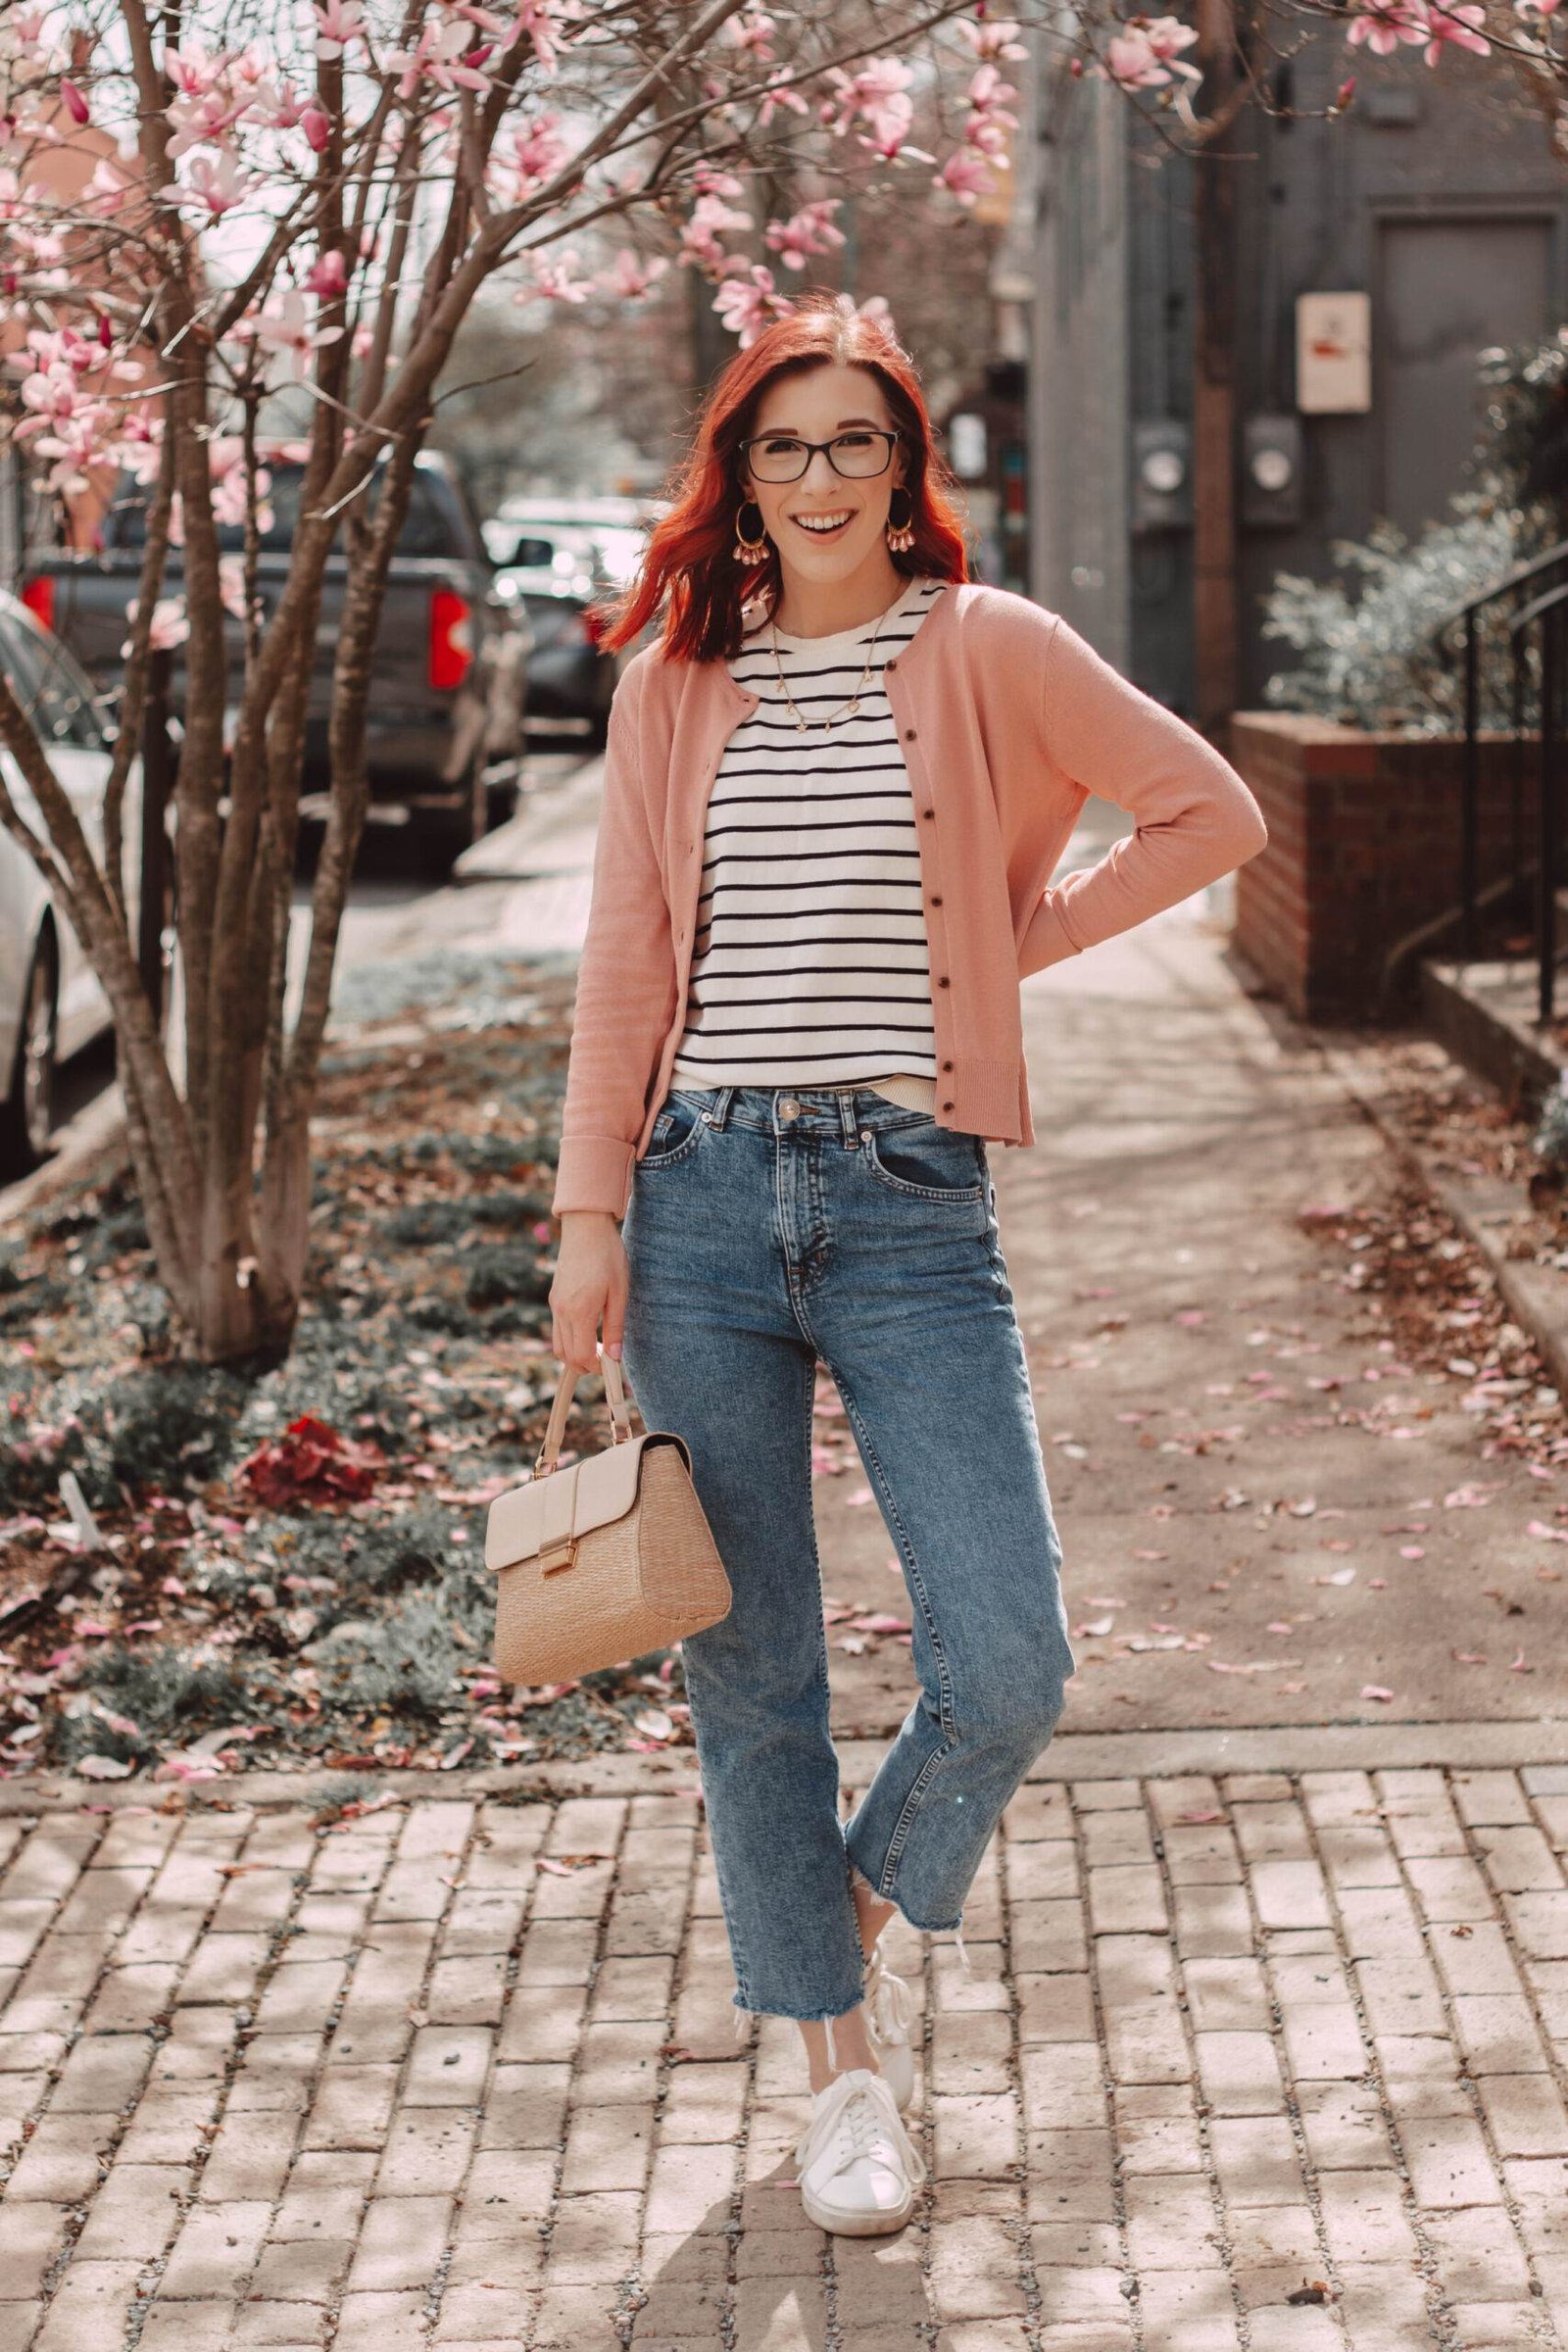 Straight Leg Jeans Outfit Ideas 